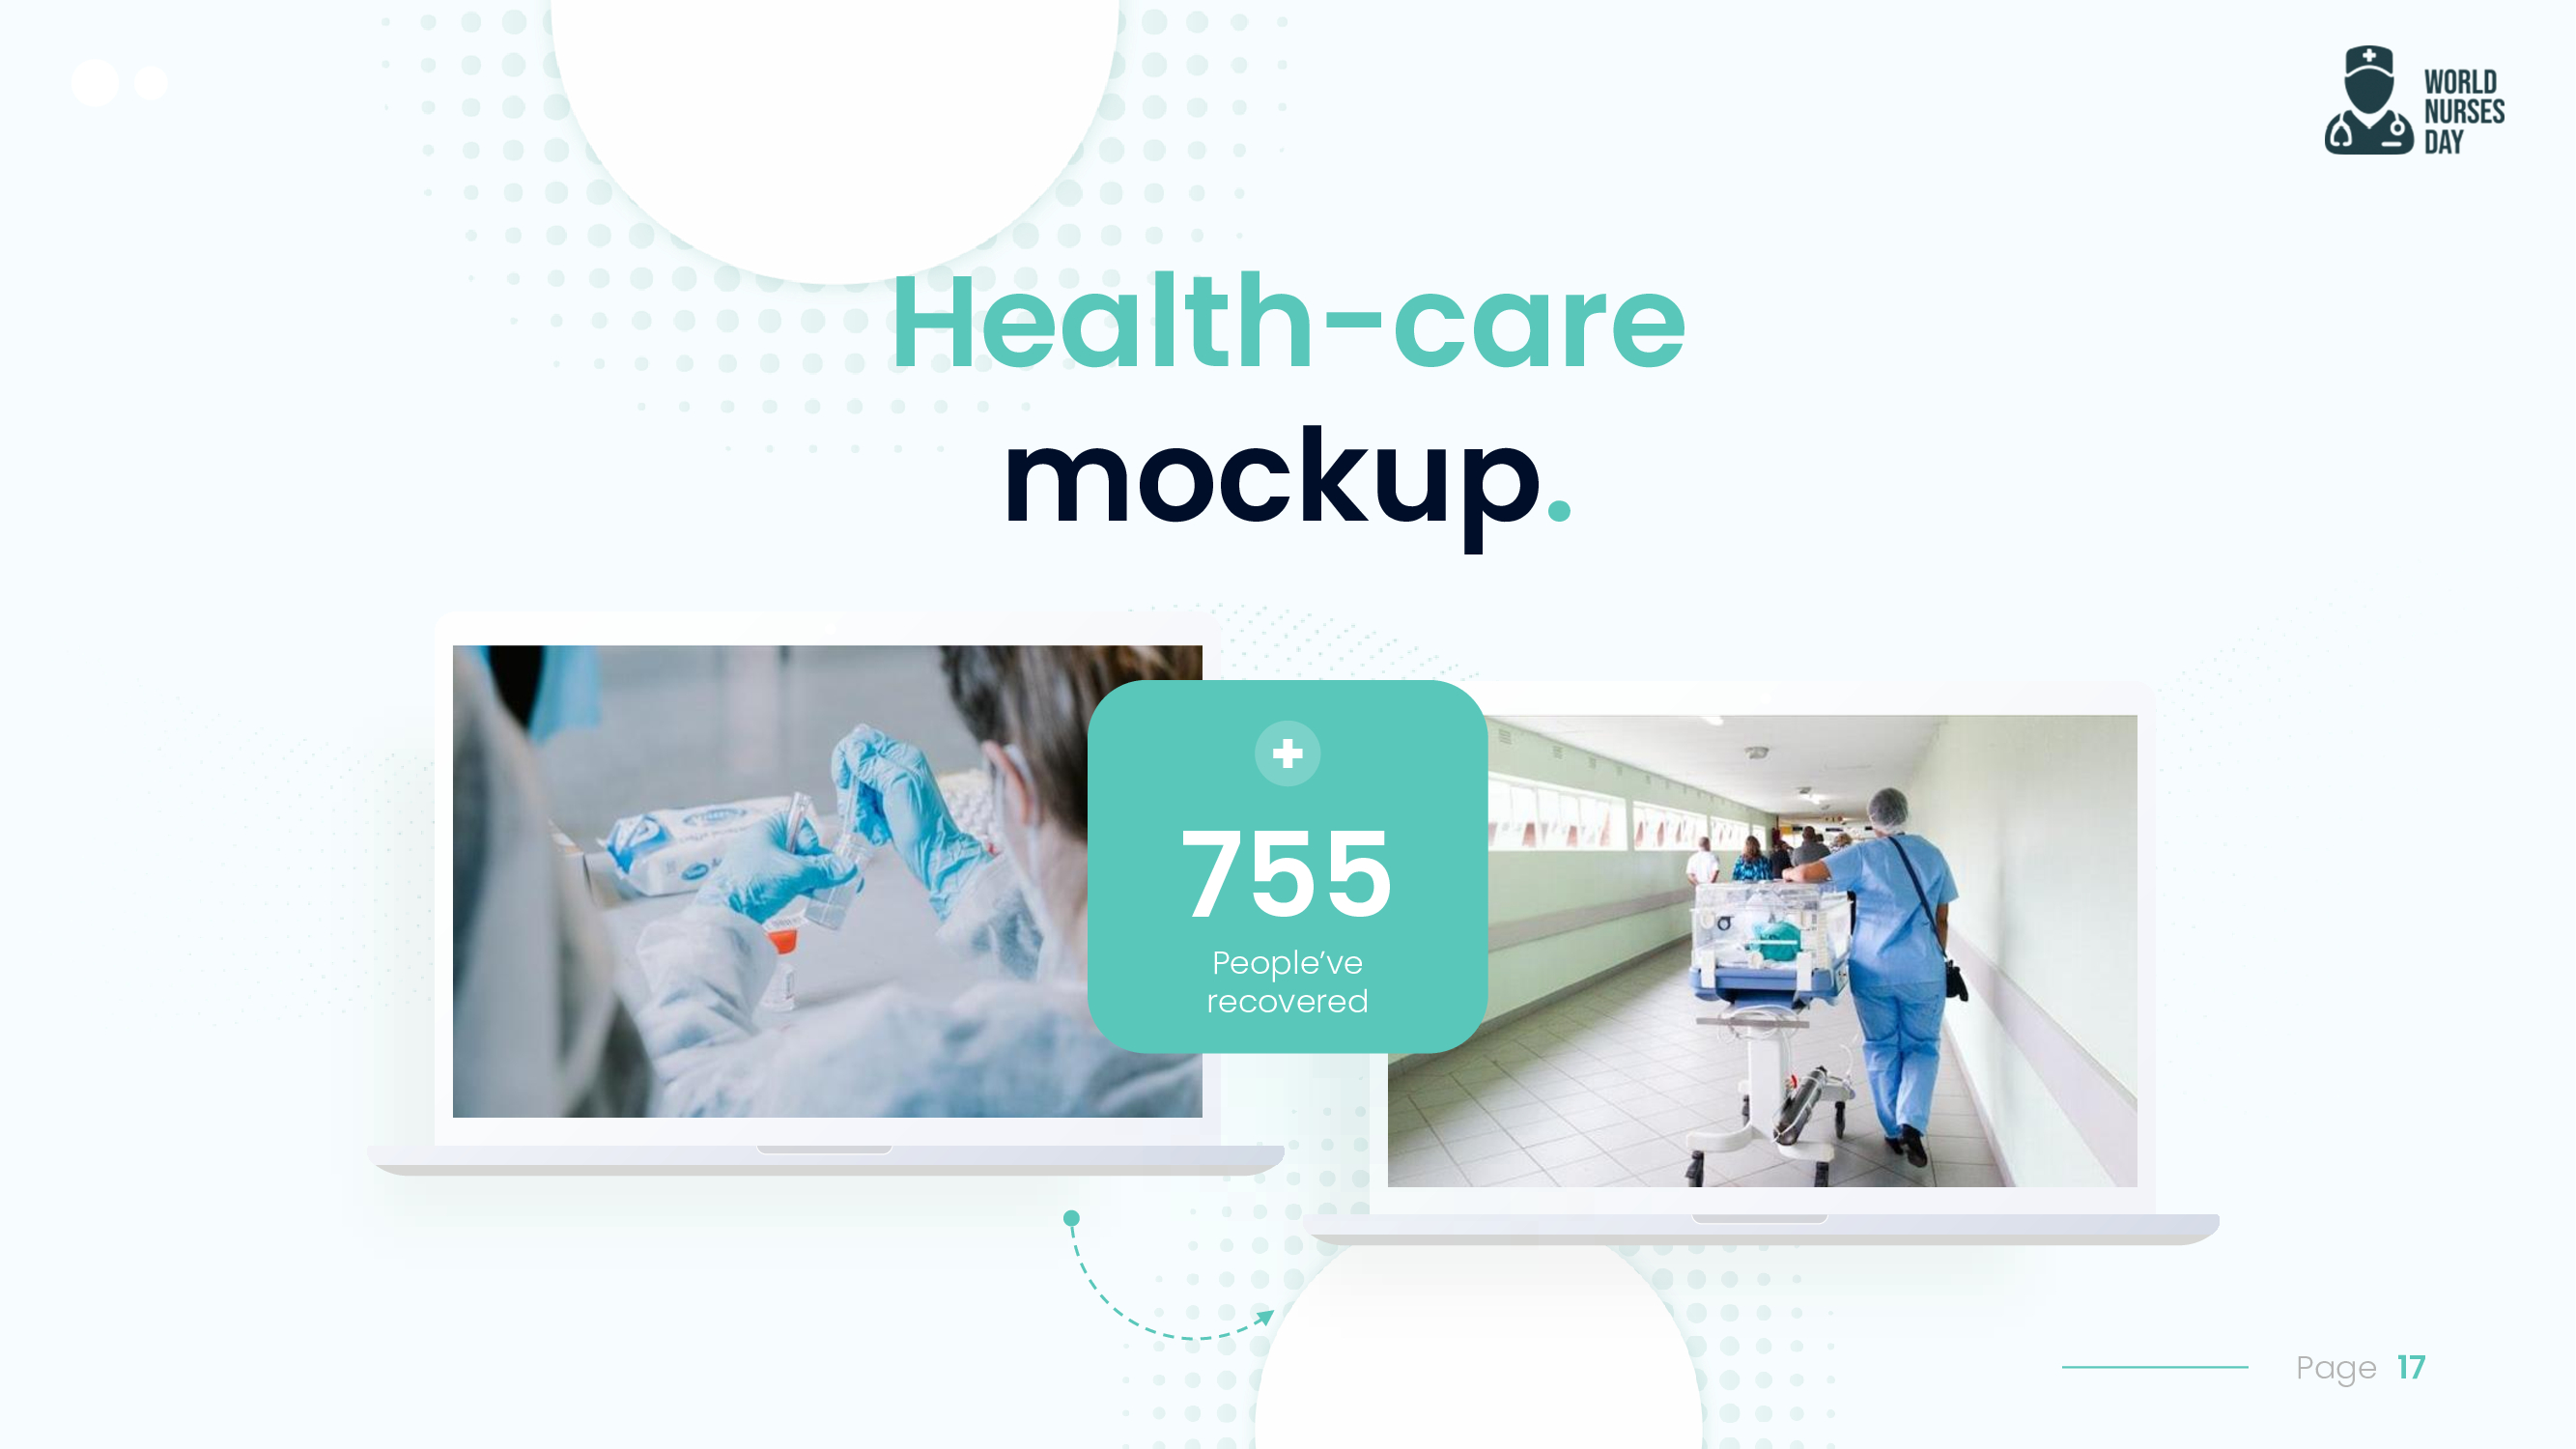 The example of health-care mockup.